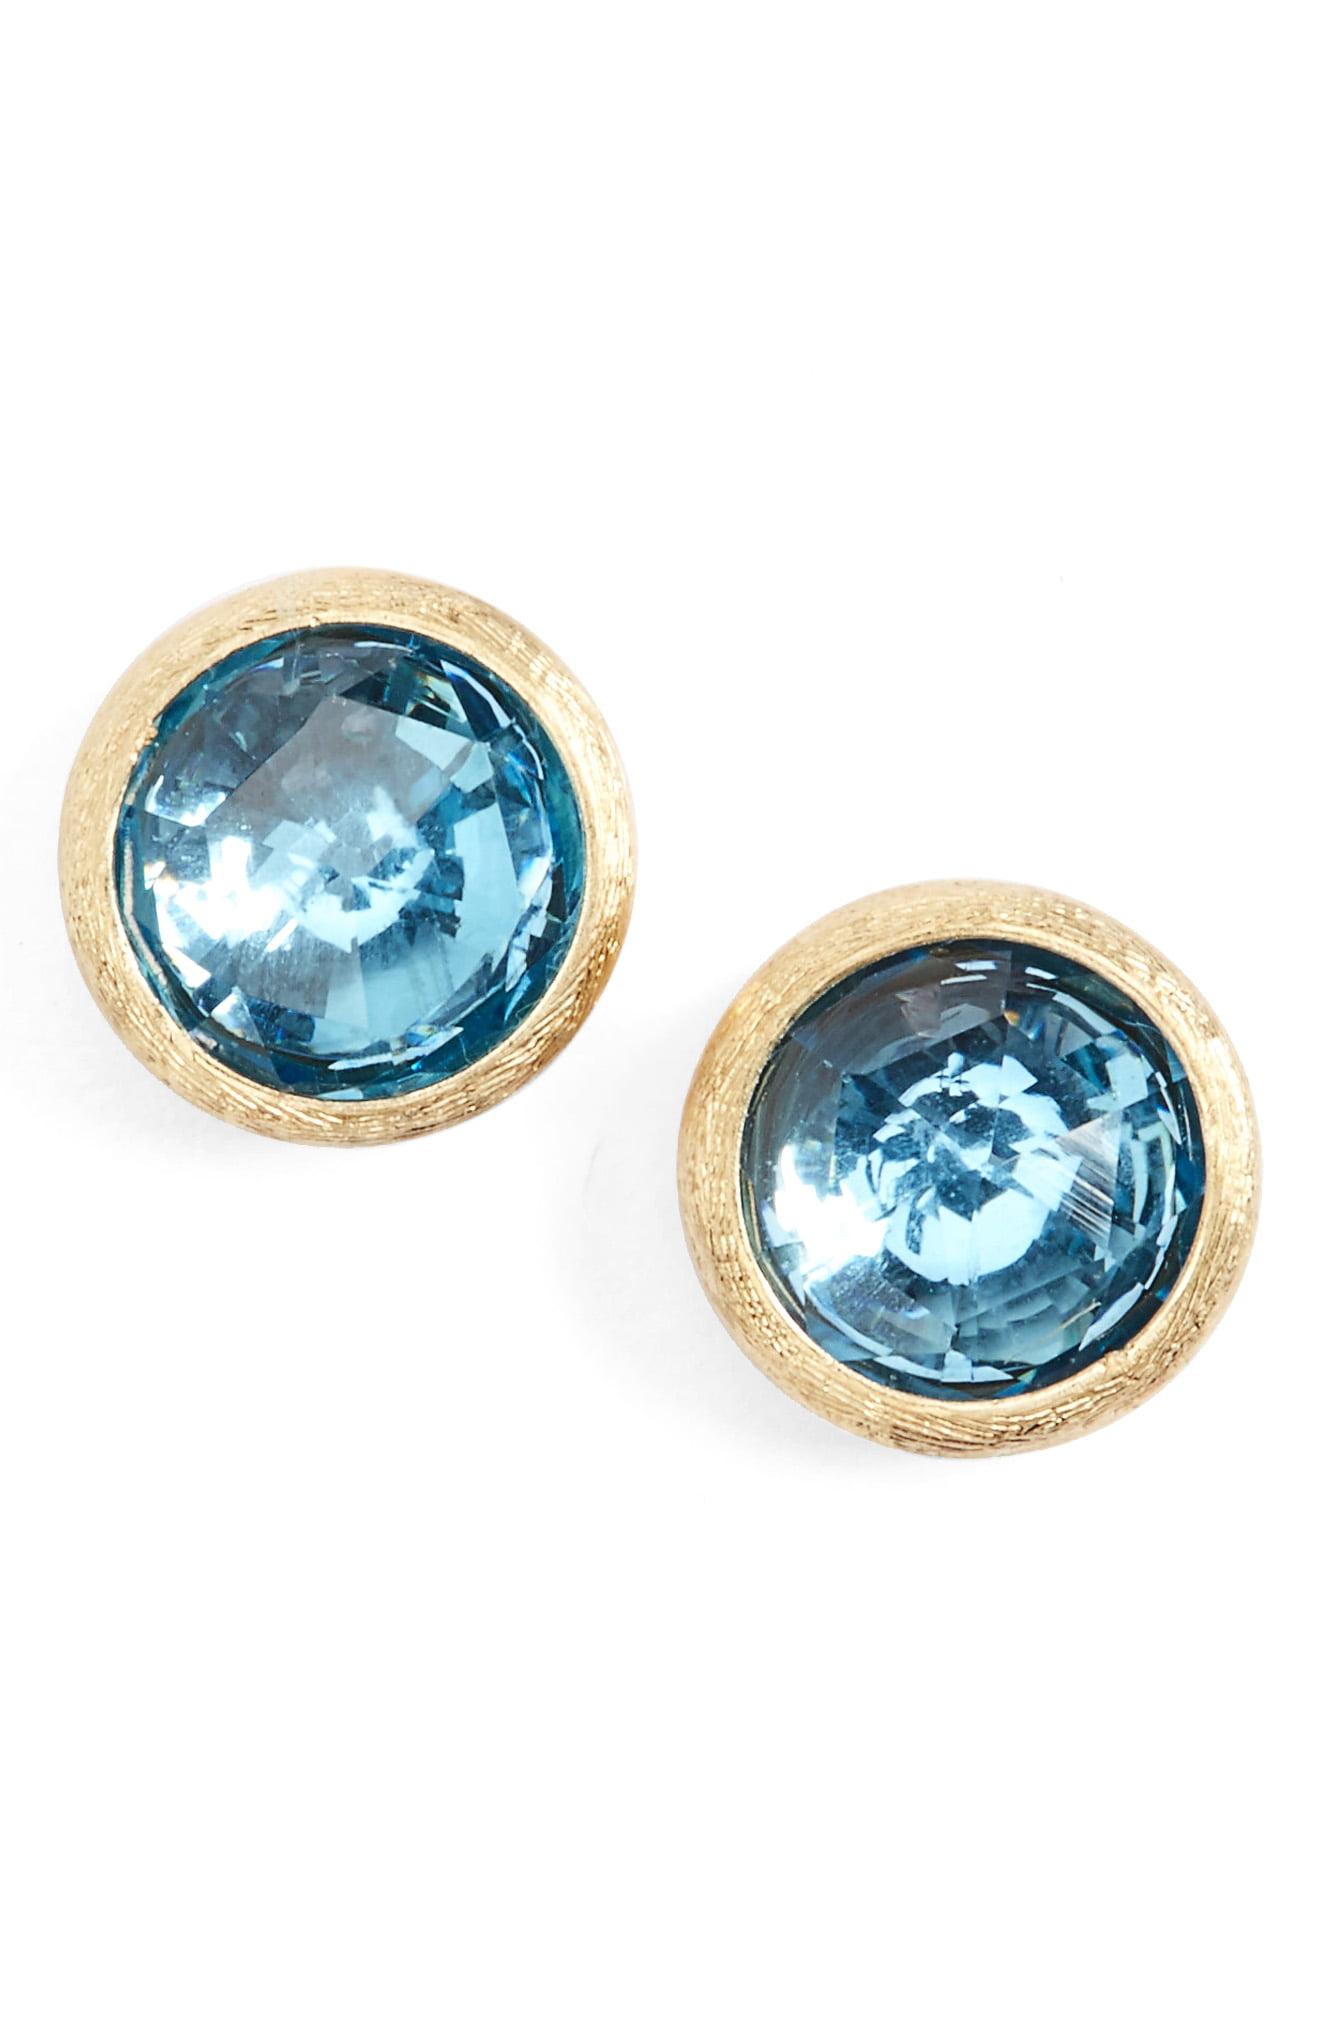 Lyst - Marco Bicego 'jaipur' Stone Stud Earrings in Blue - Save 25%